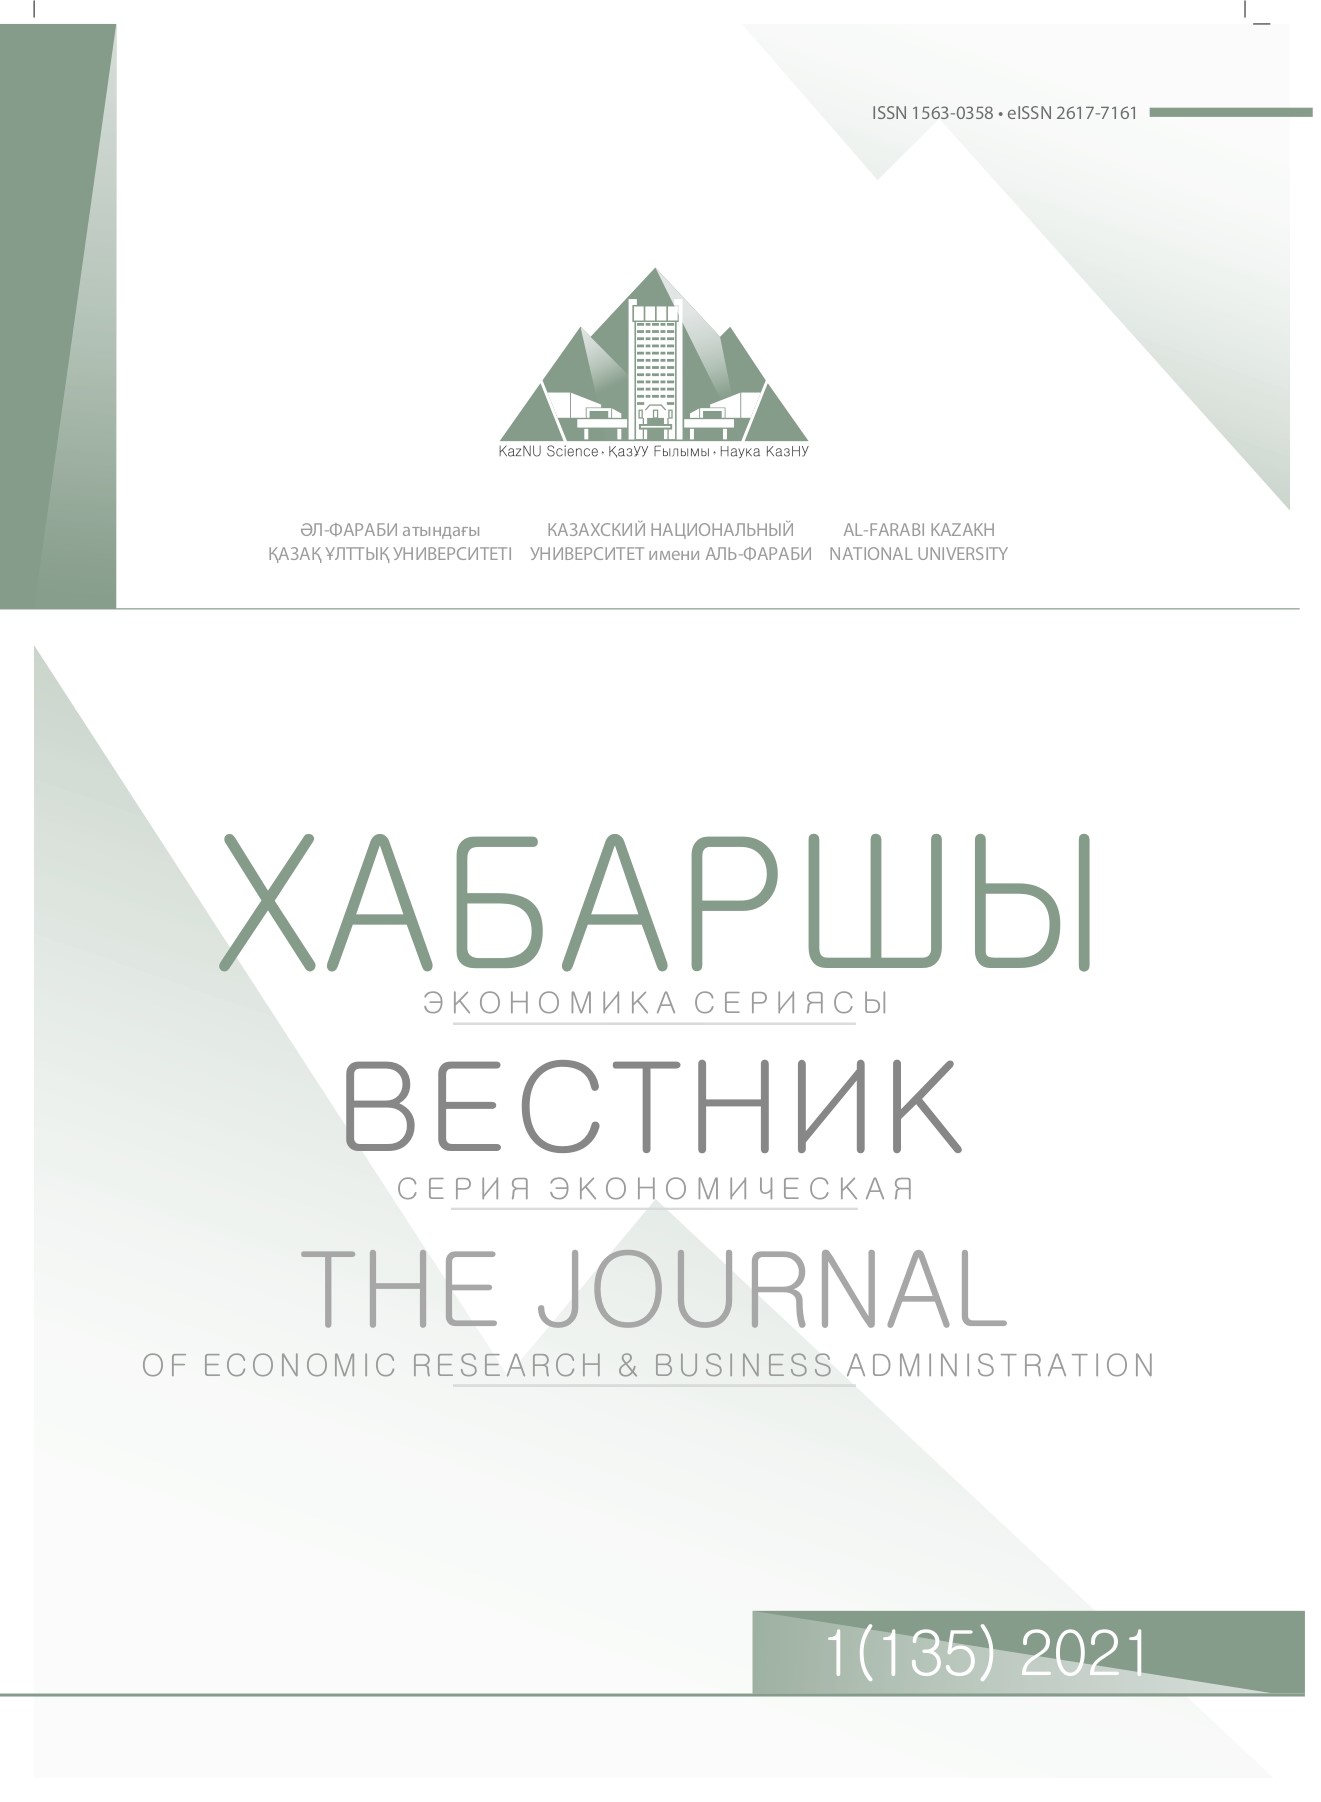 					View Vol. 135 No. 1 (2021): The Journal of Economic Research & Business Administration
				